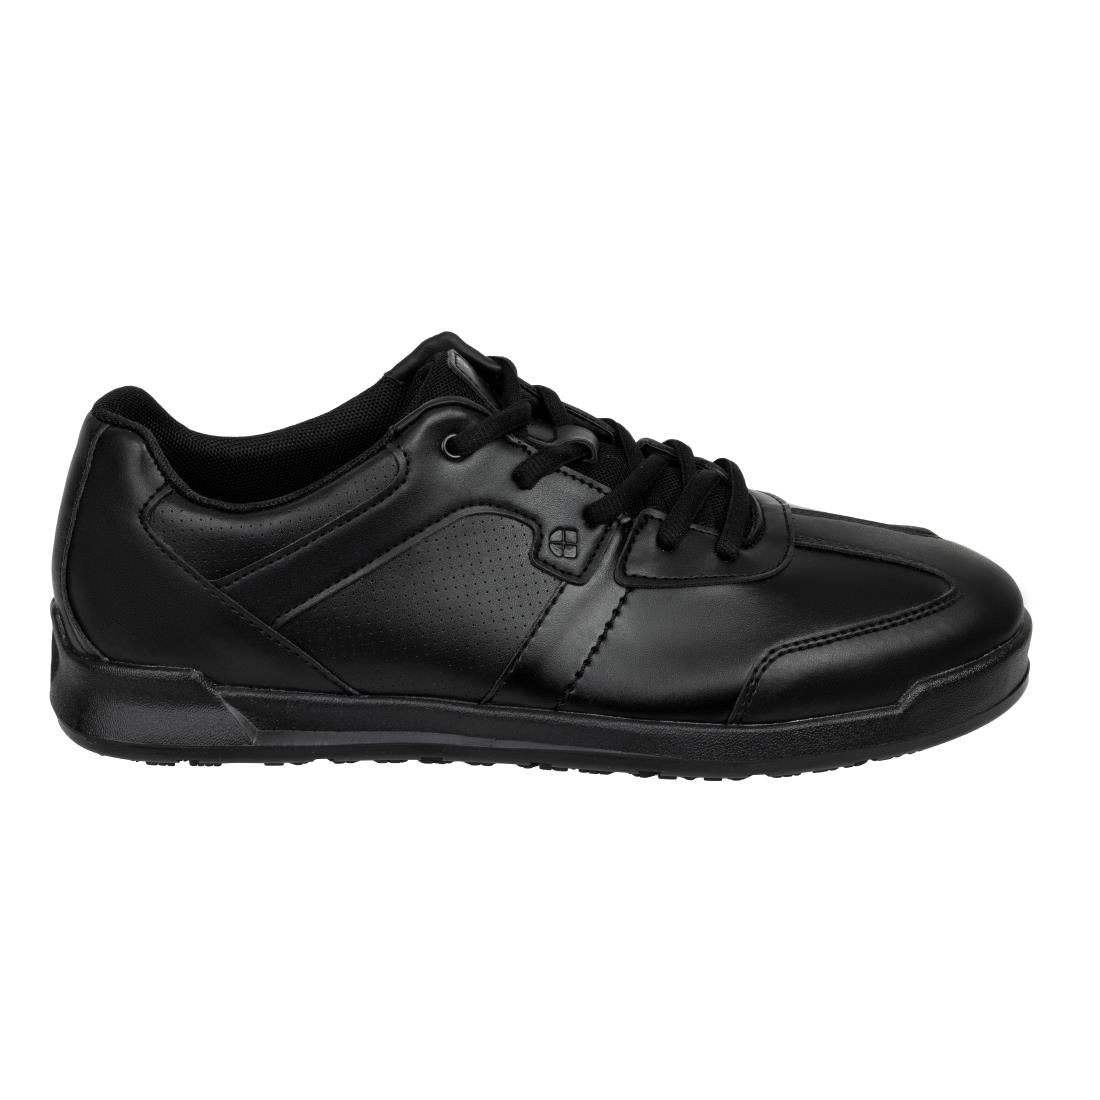 BB585-40 Shoes for Crews Freestyle Trainers Black Size 40